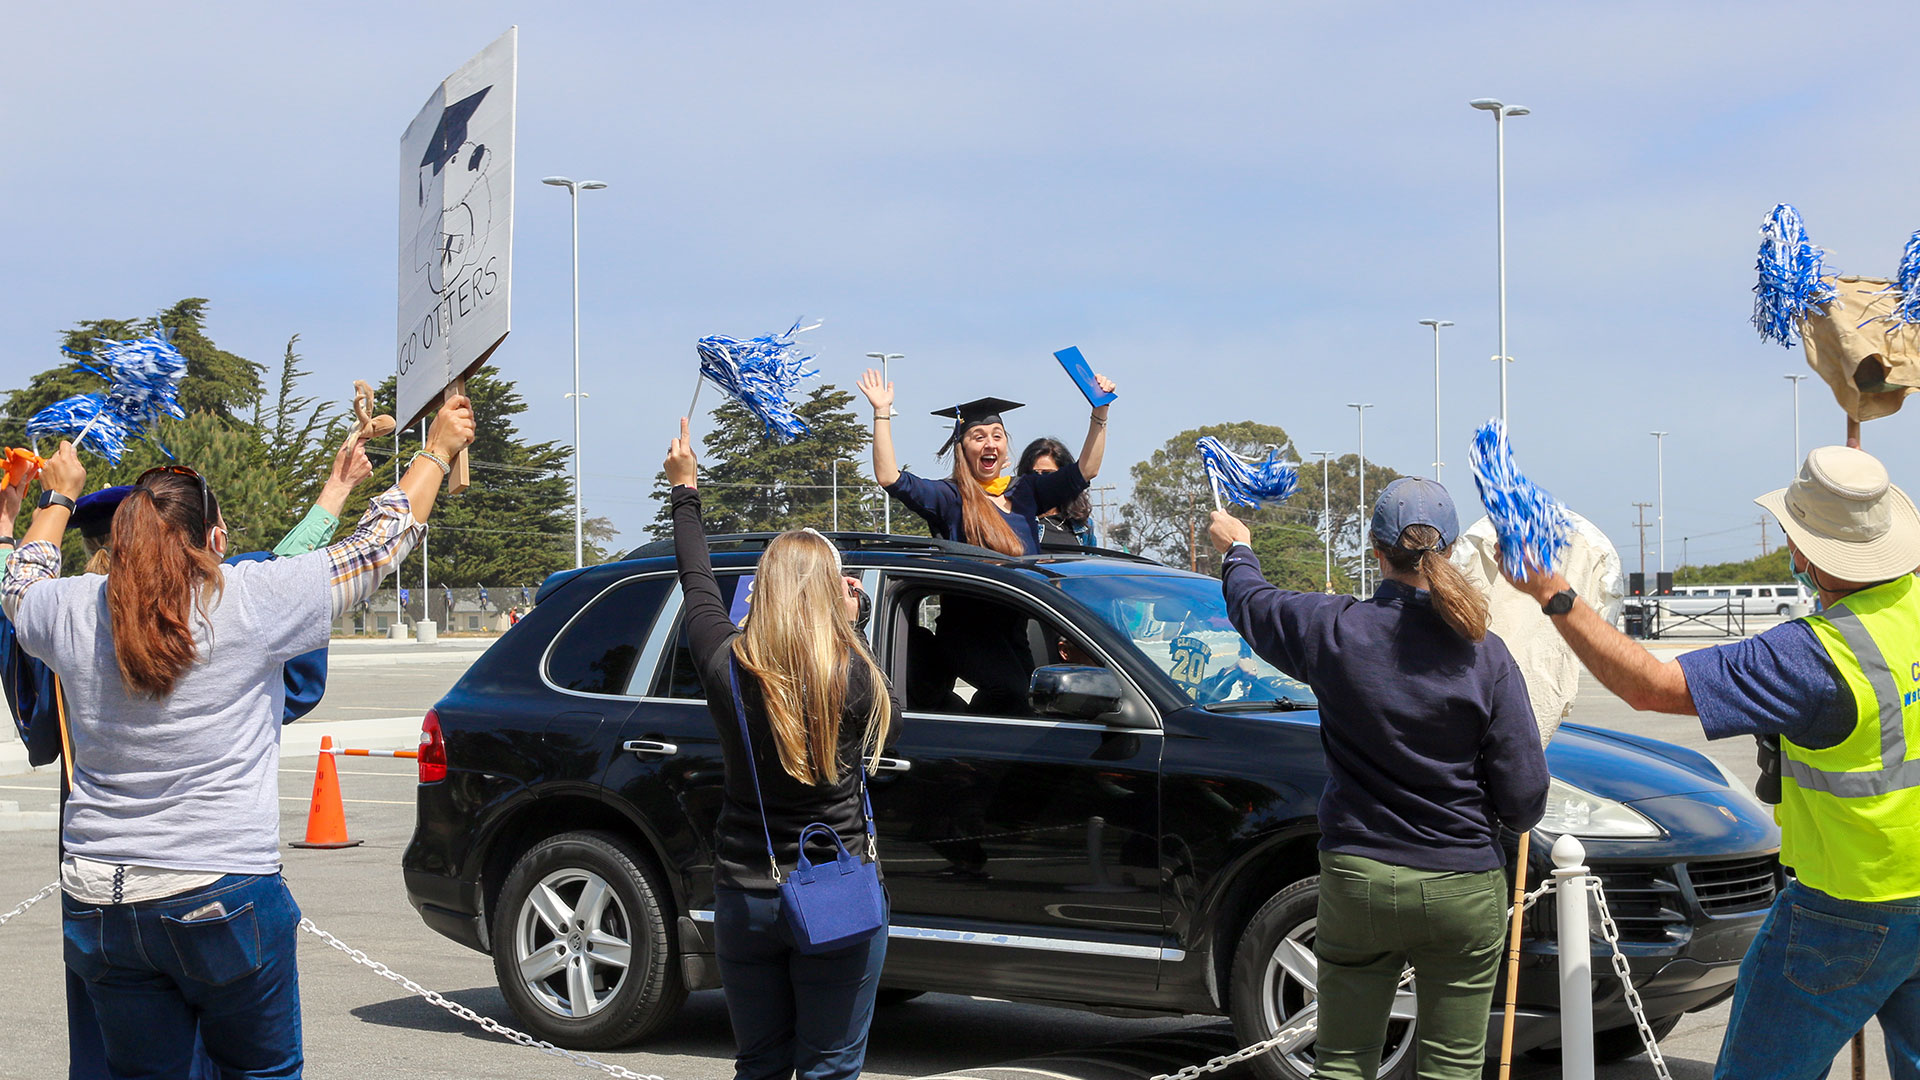 Excited graduate cheering from car while faculty and staff cheer her on